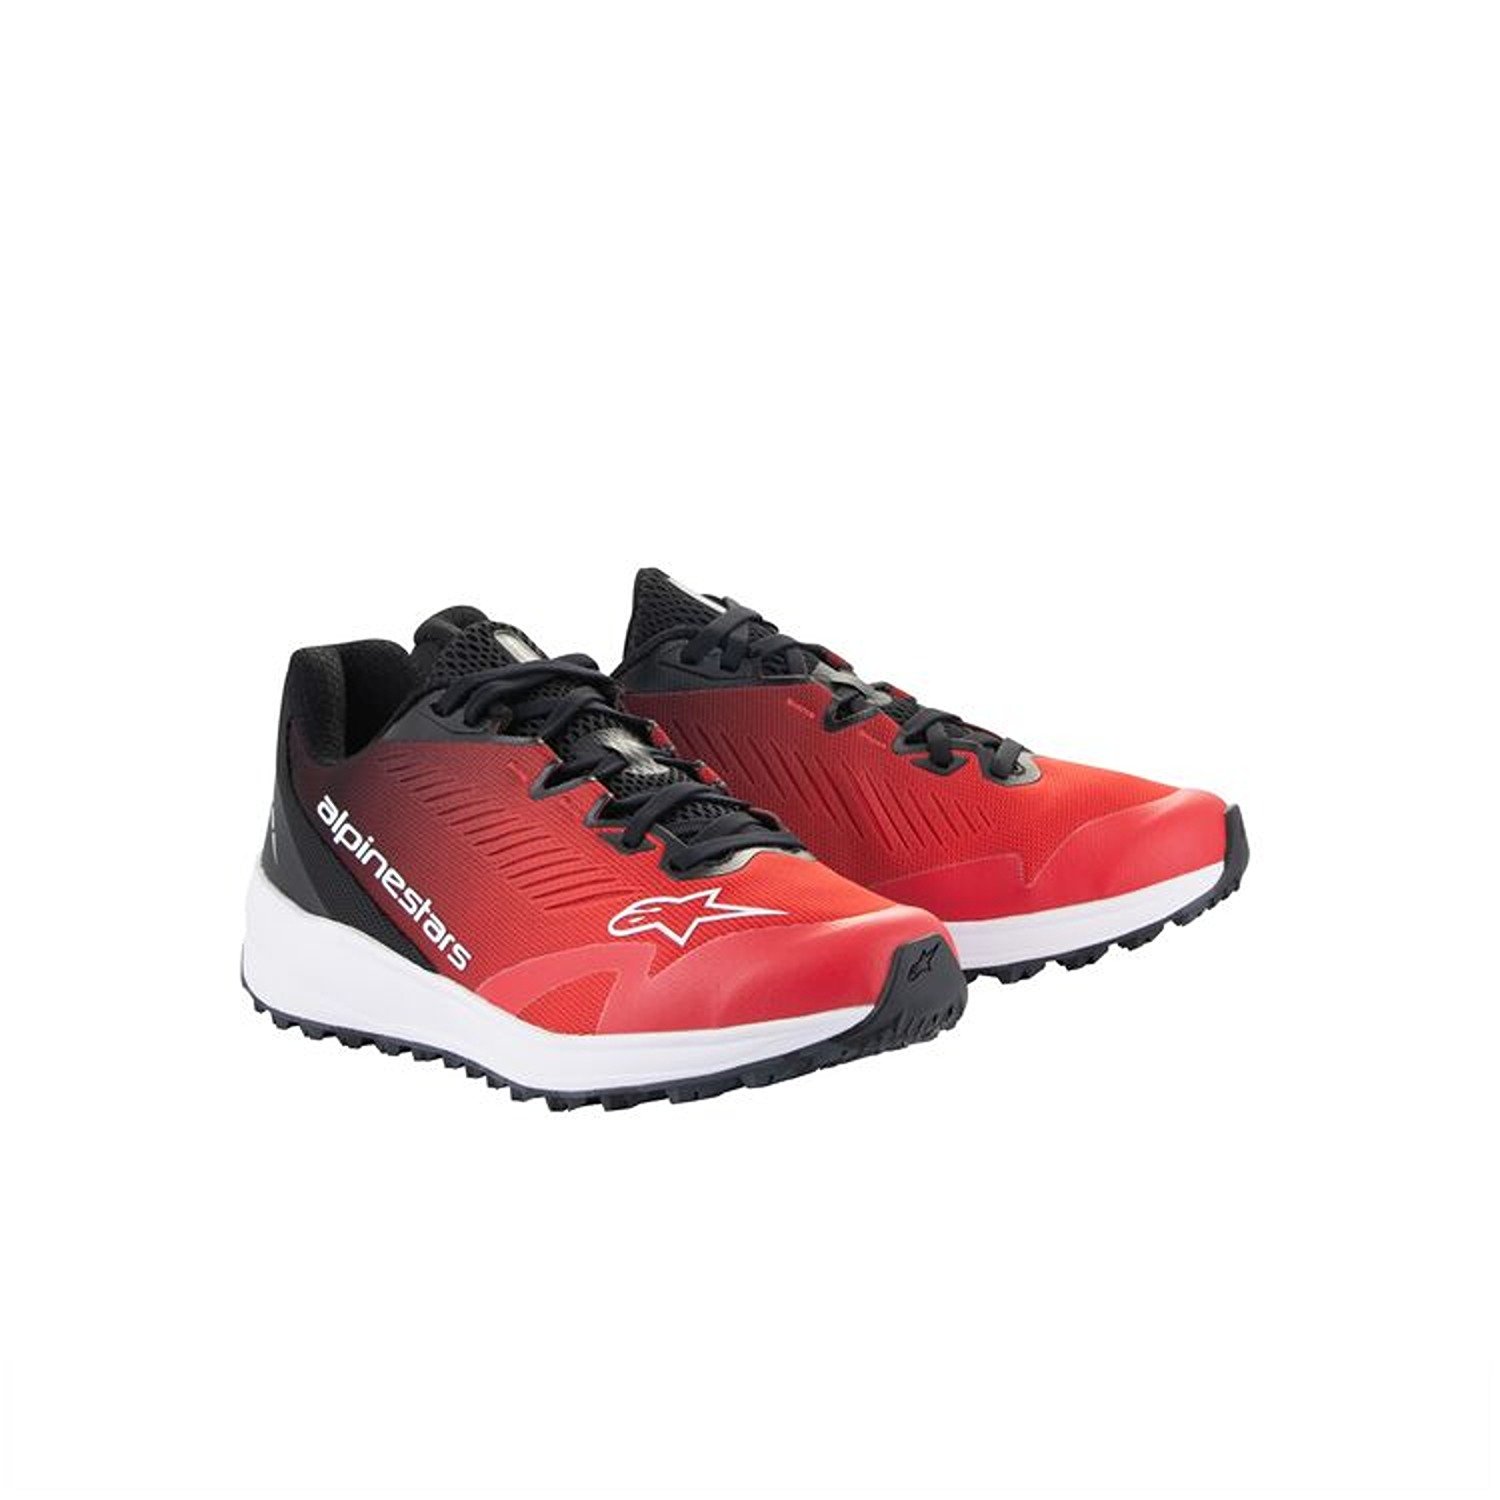 Image of Alpinestars Meta Road V2 Shoes Red Black White Taille US 135